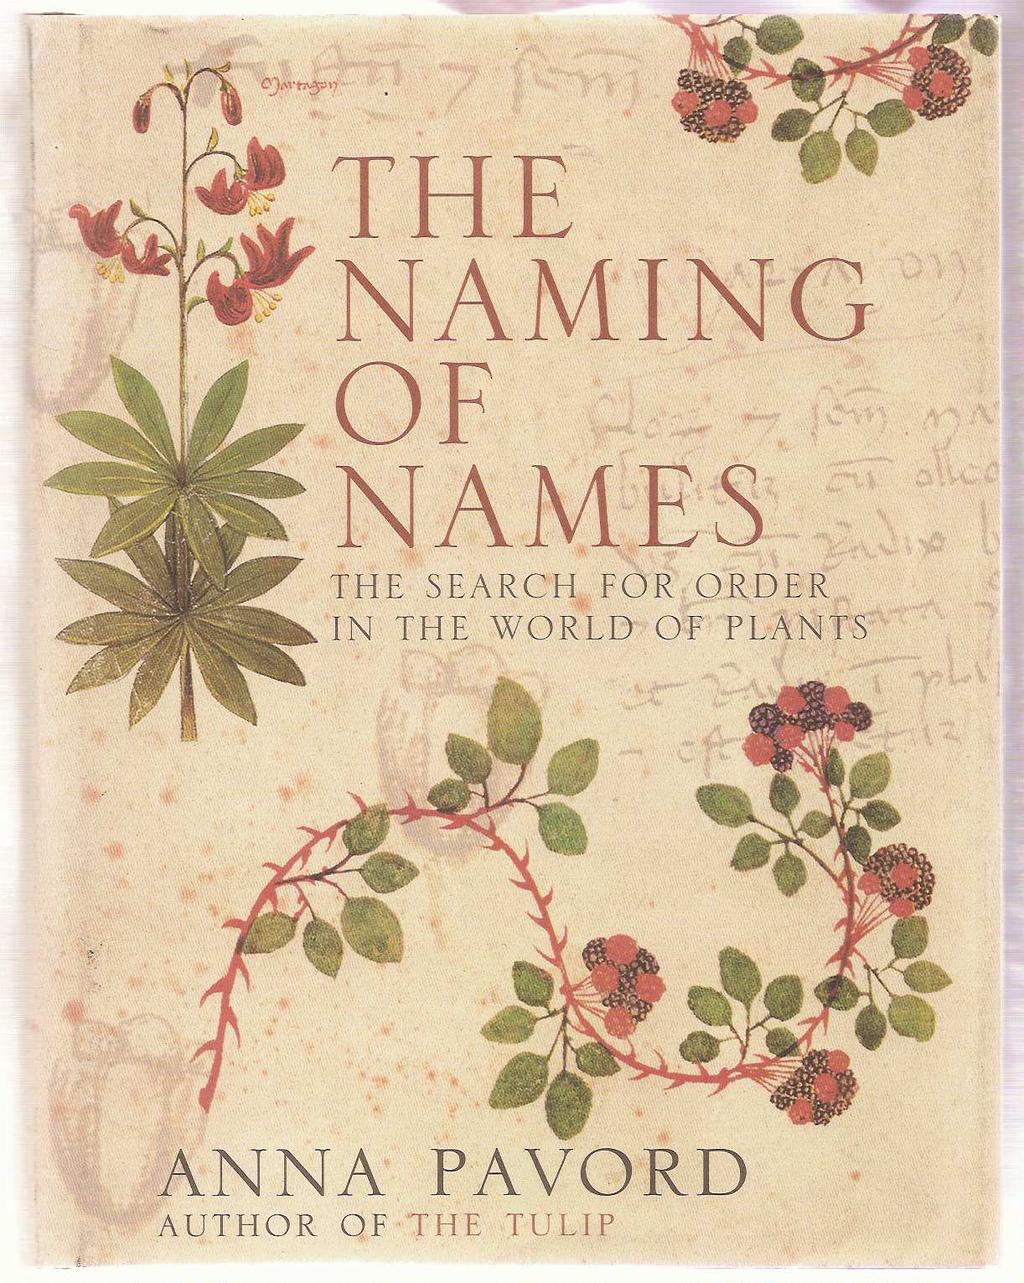 Pavord, Anna, The naming of names: the search for order in the world of plants.